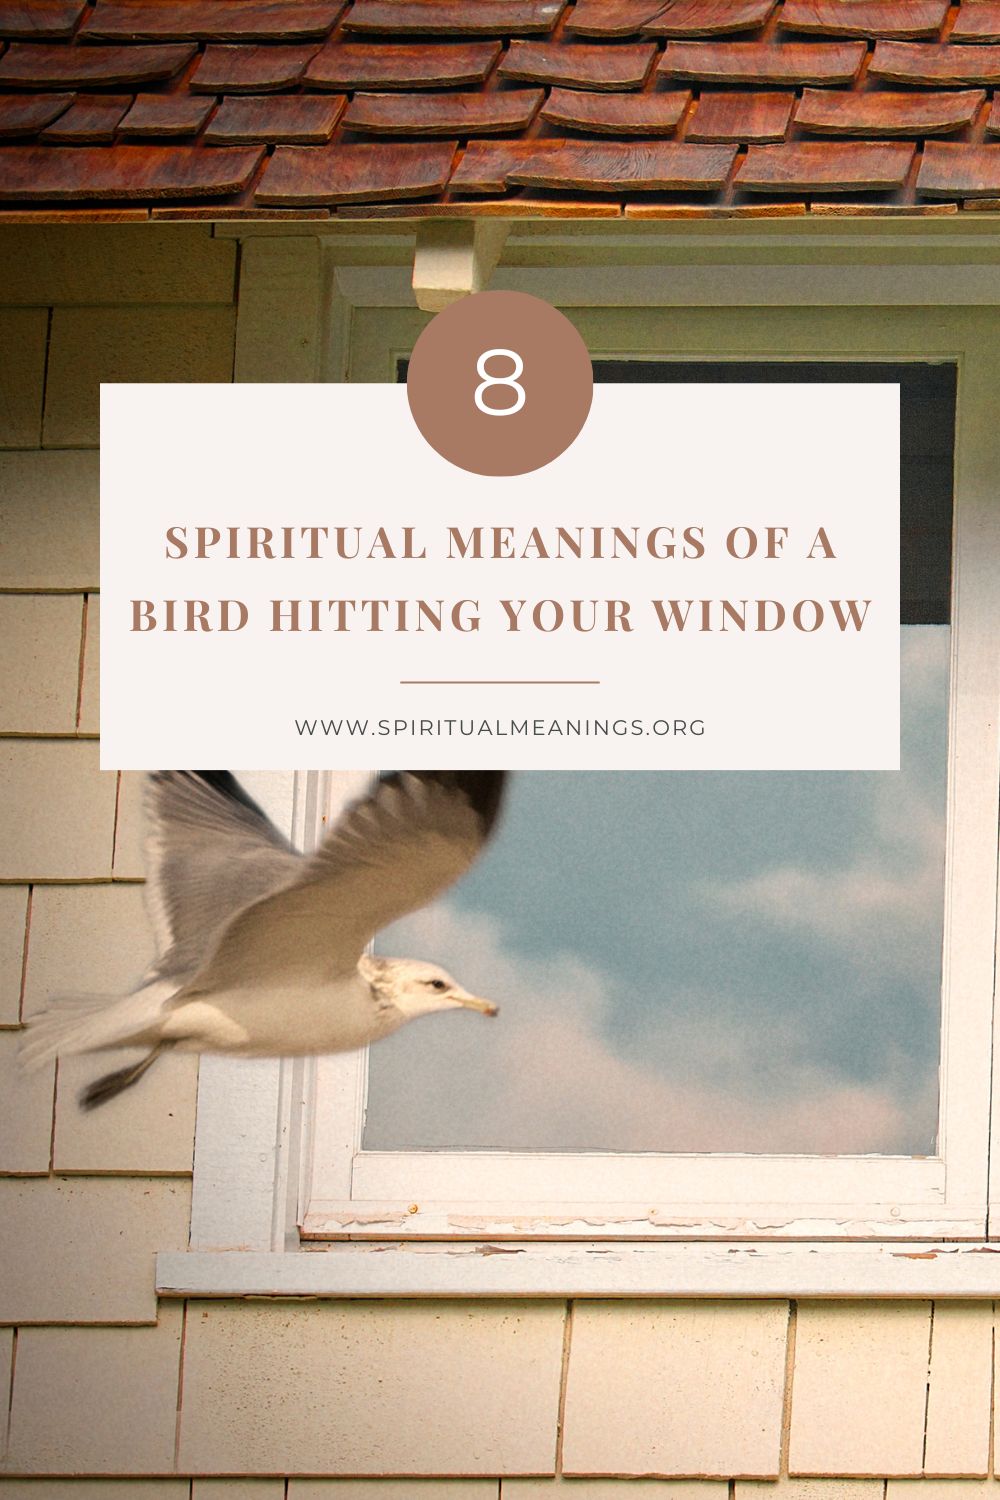 Several conflicting ways to interpret a bird hitting a window